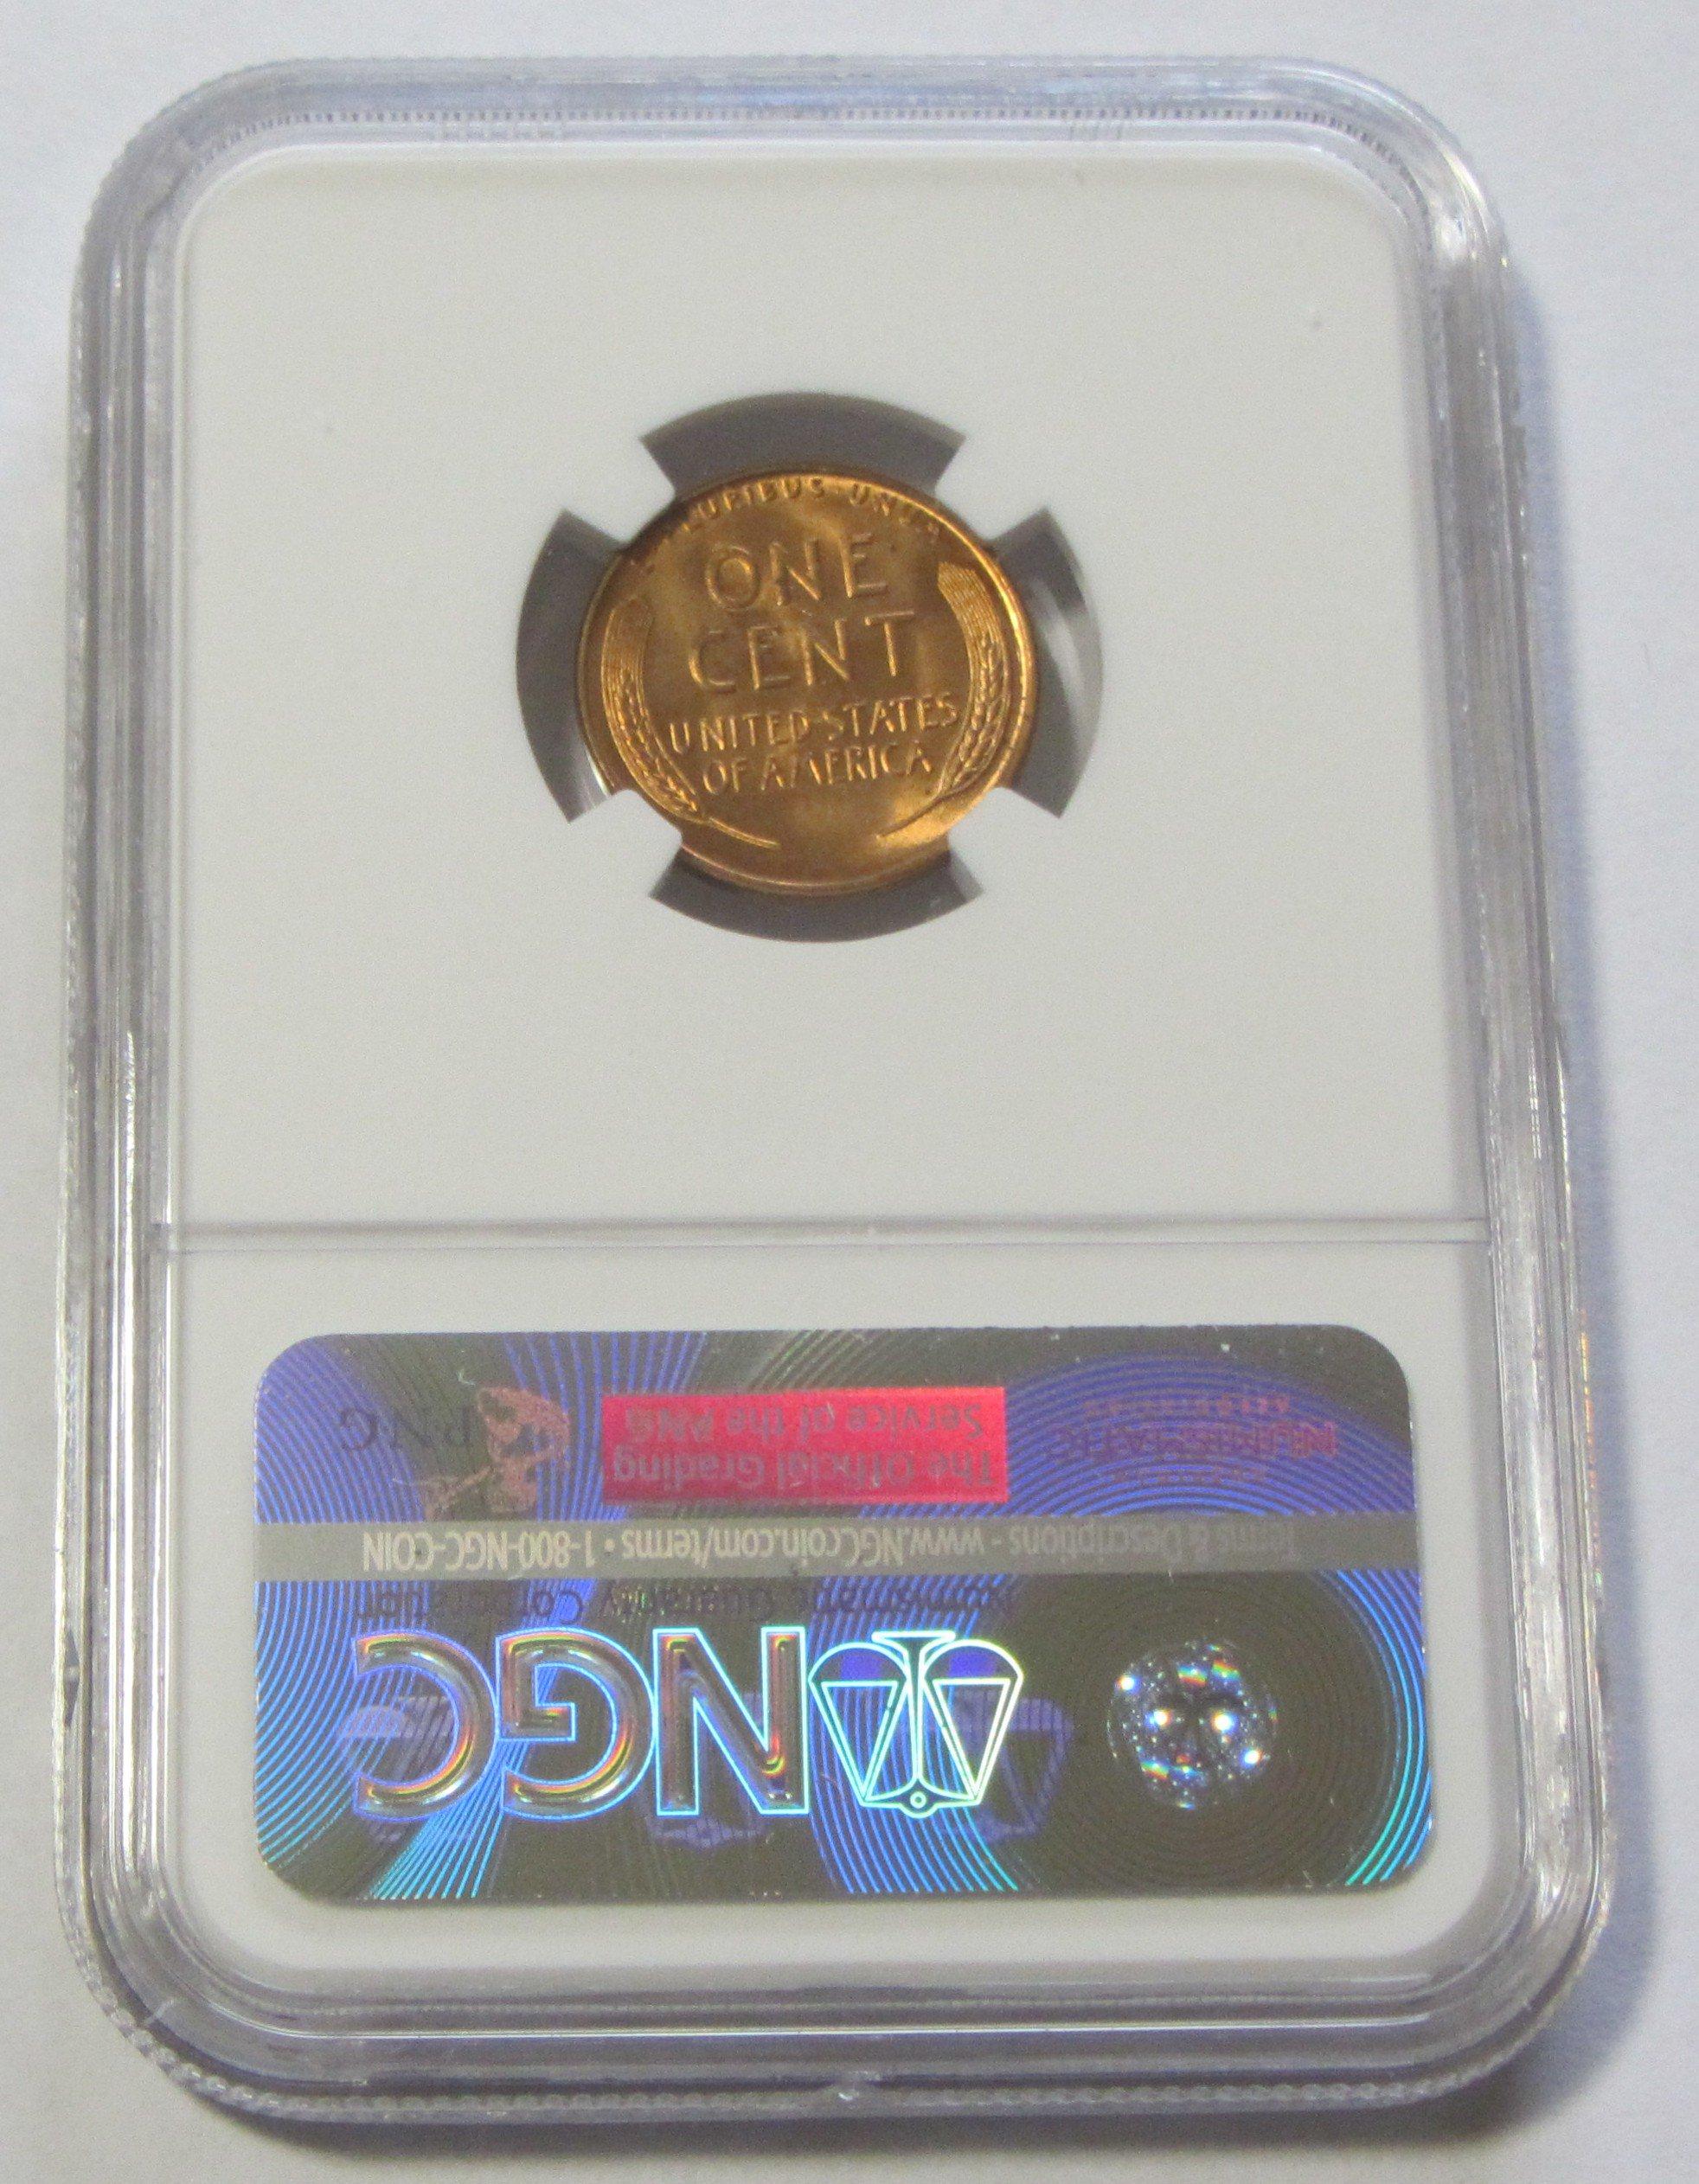 1935 WHEAT CENT NGC MS 65 RED GEM